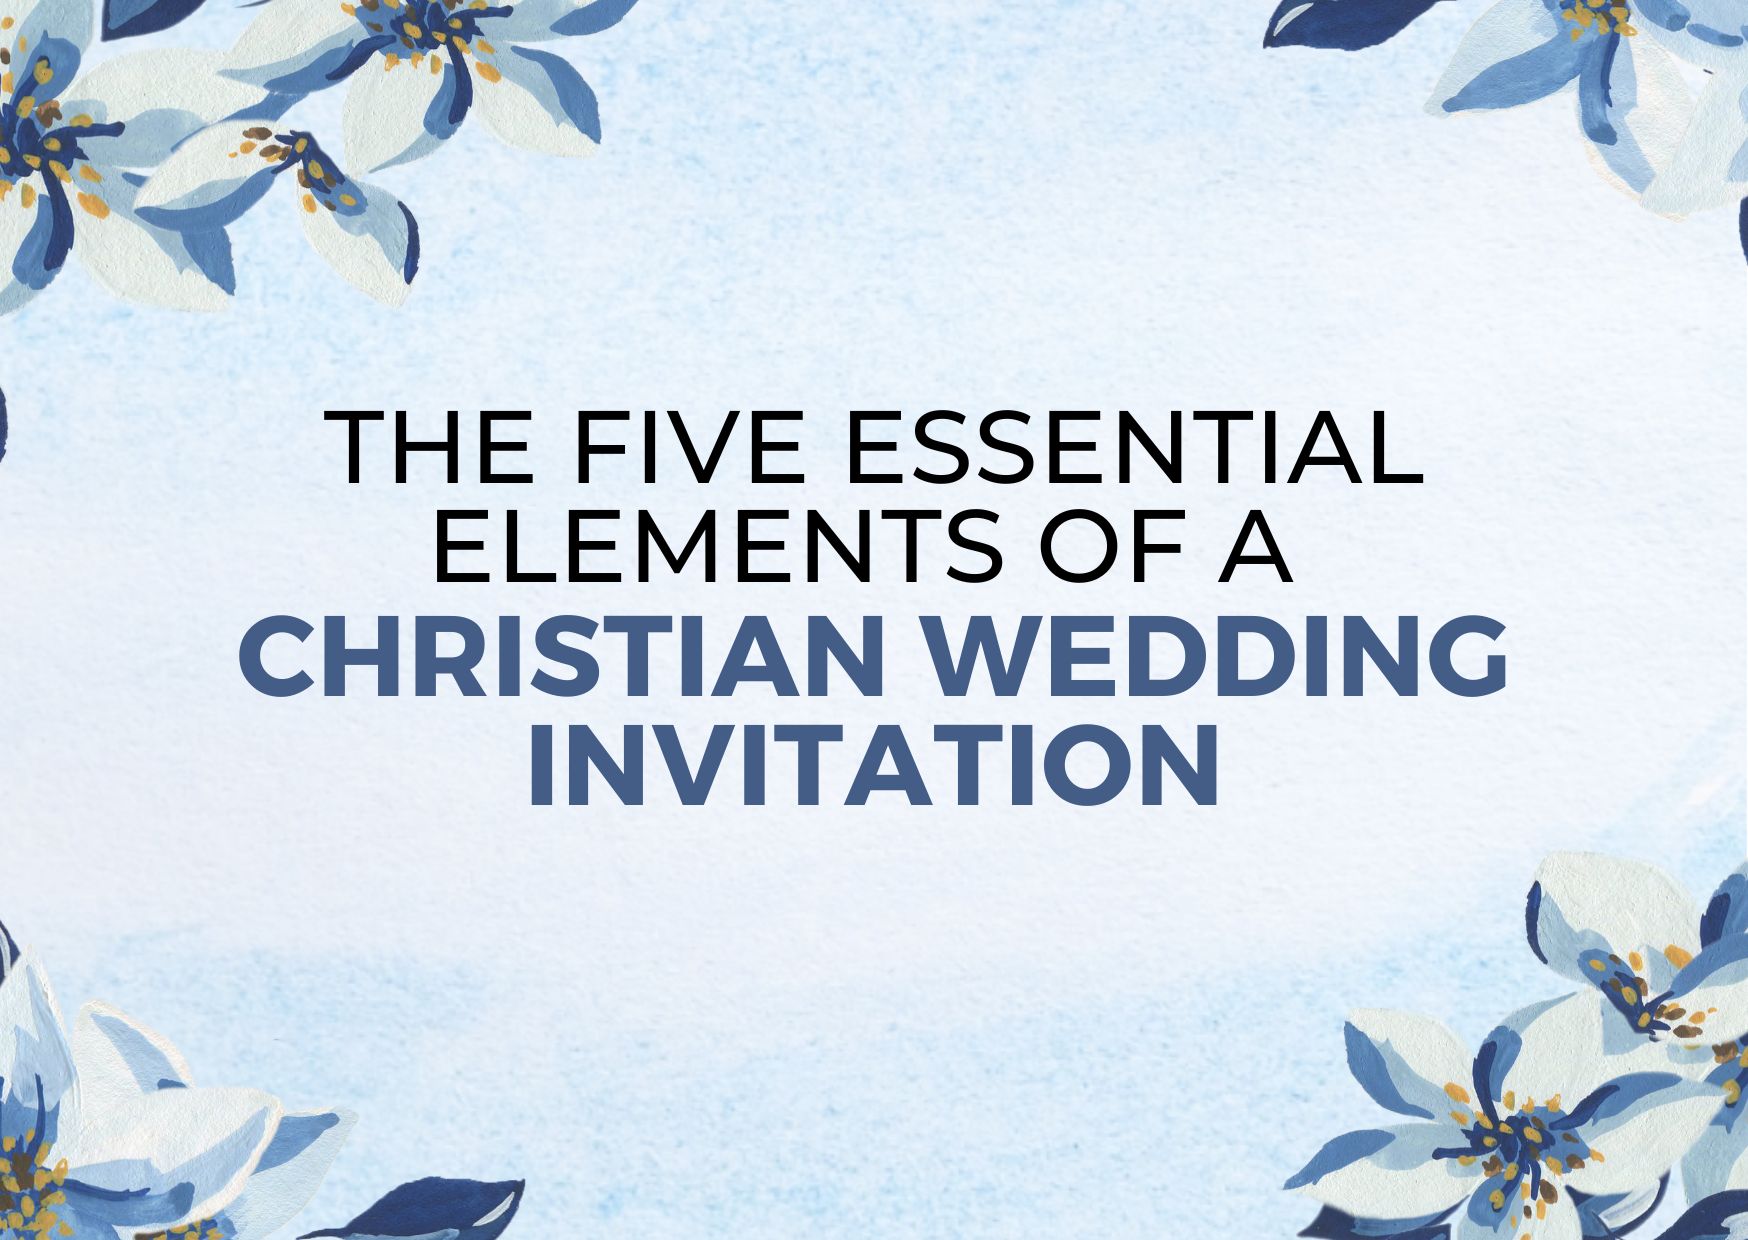 The Five Essential Elements of a Christian Wedding Invitation